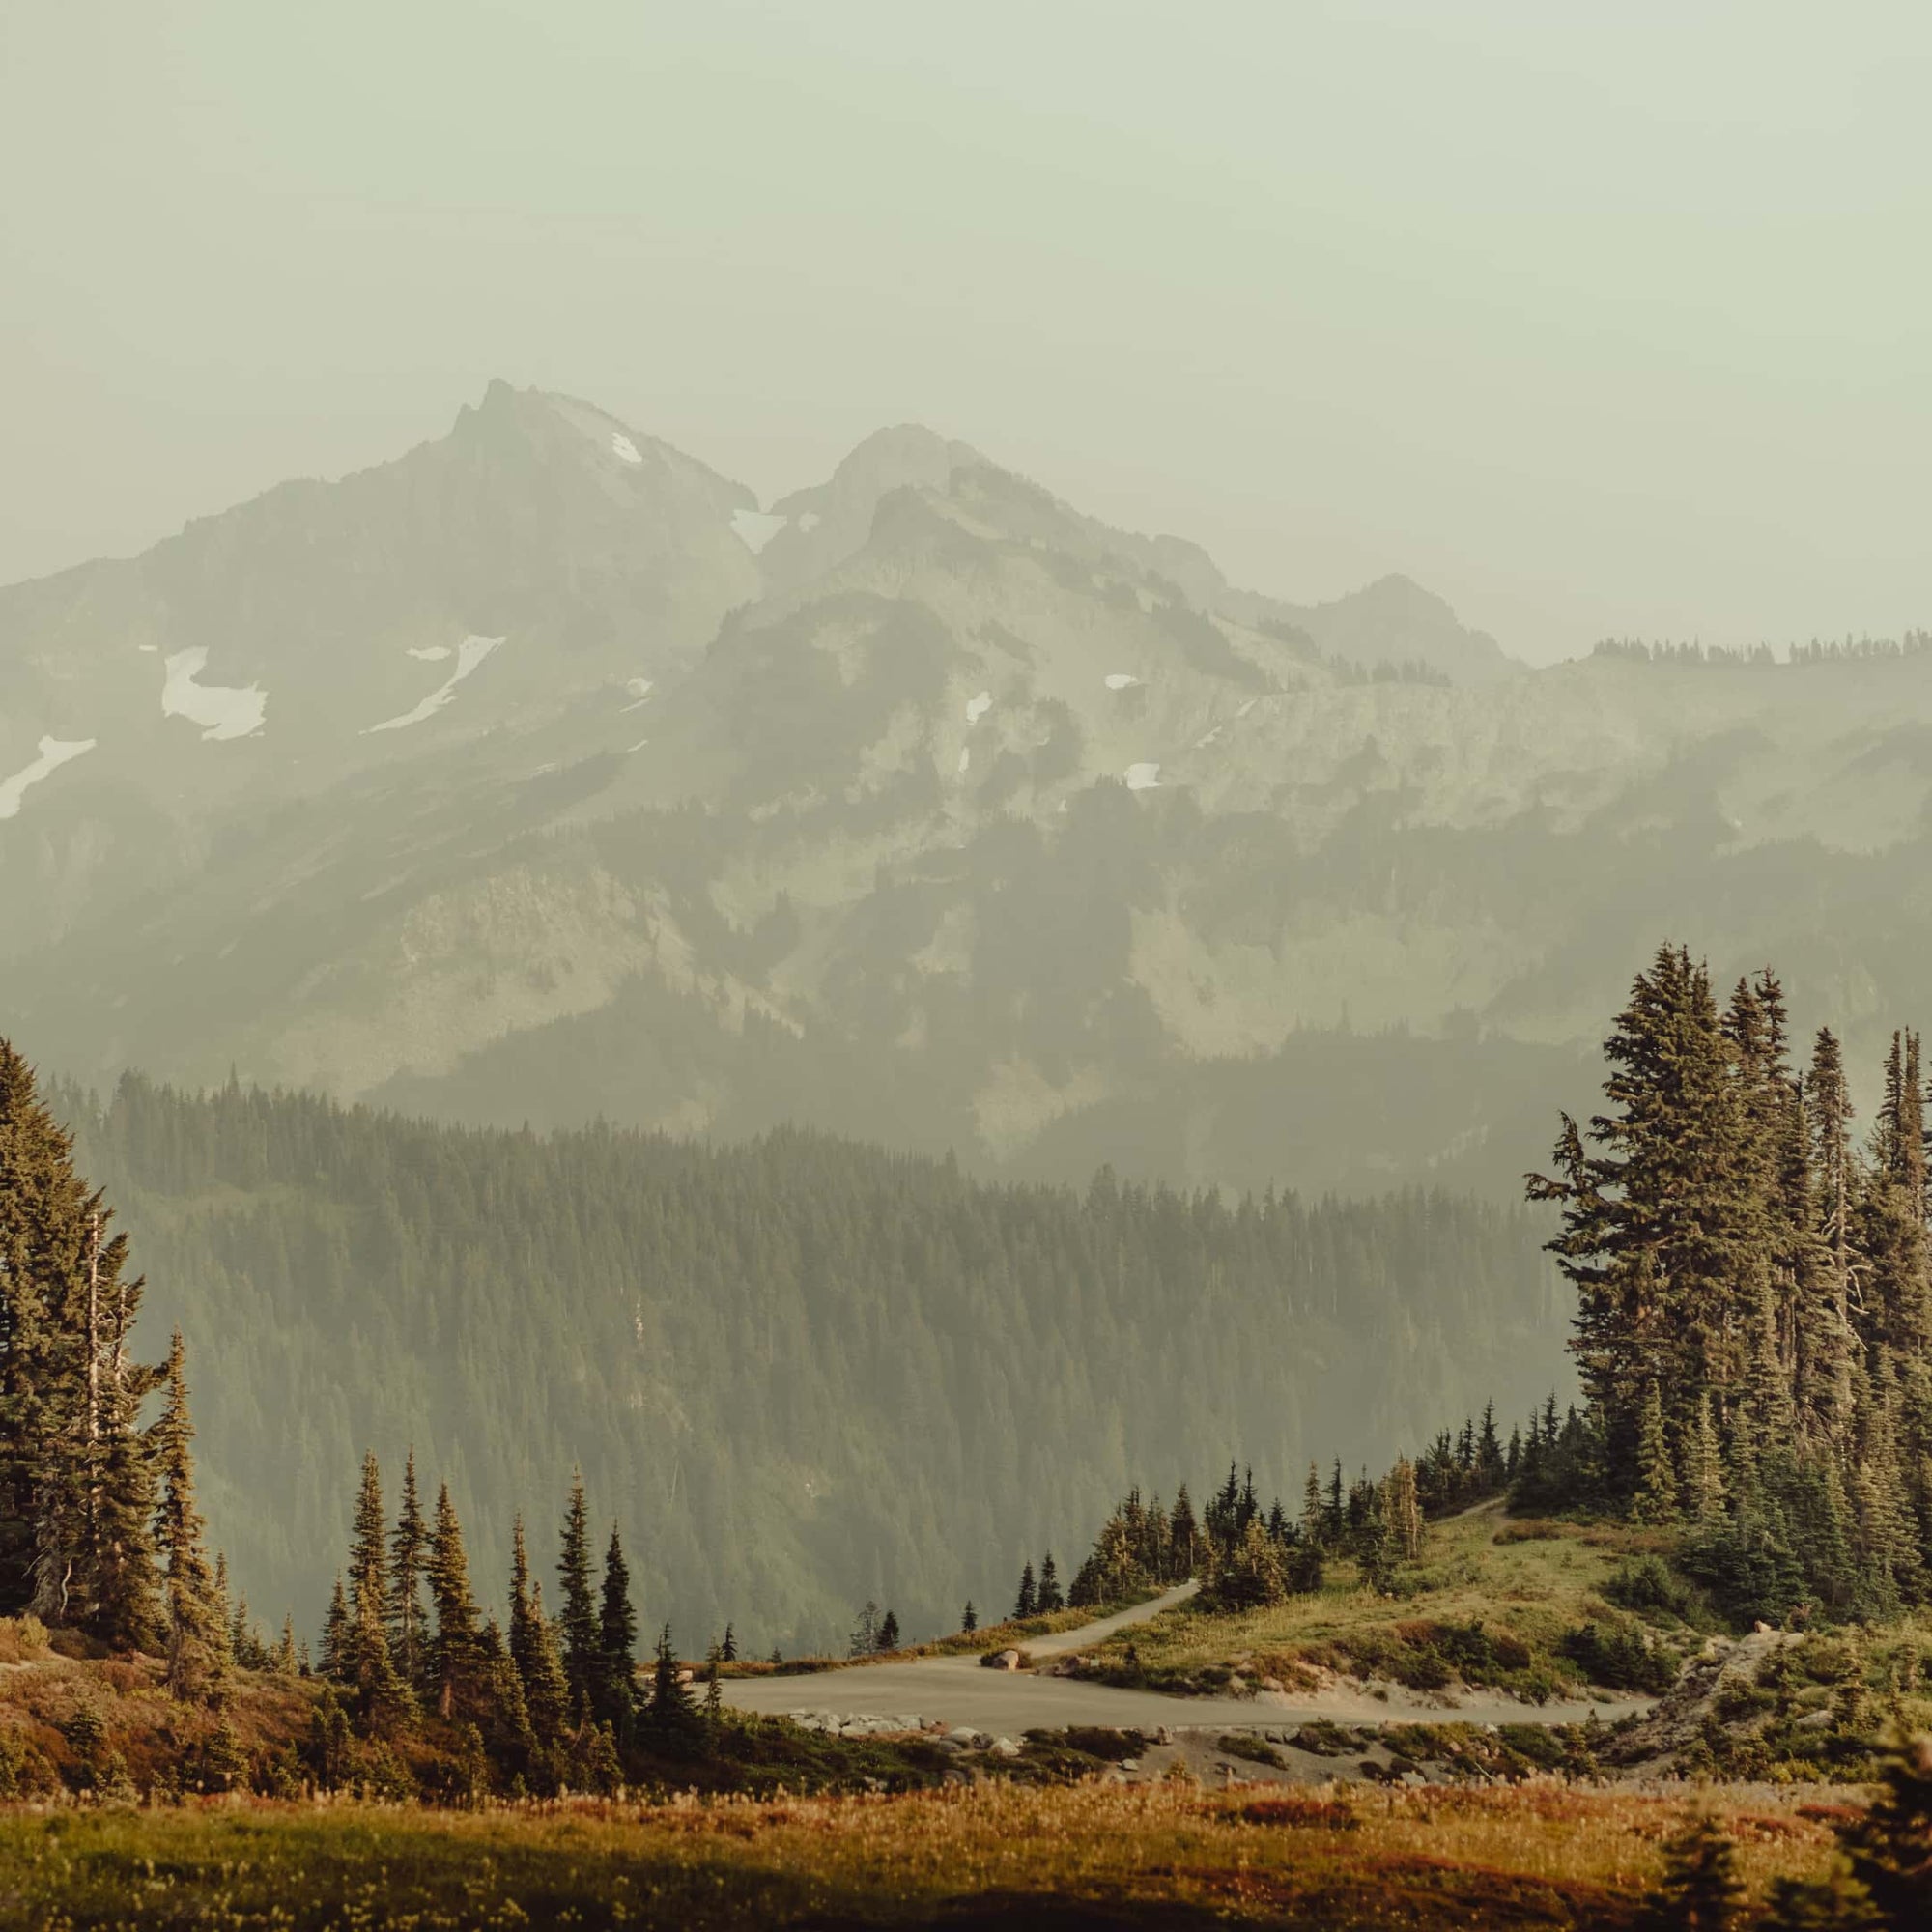 An image of a landscape full of trees in Mount Rainier National Park